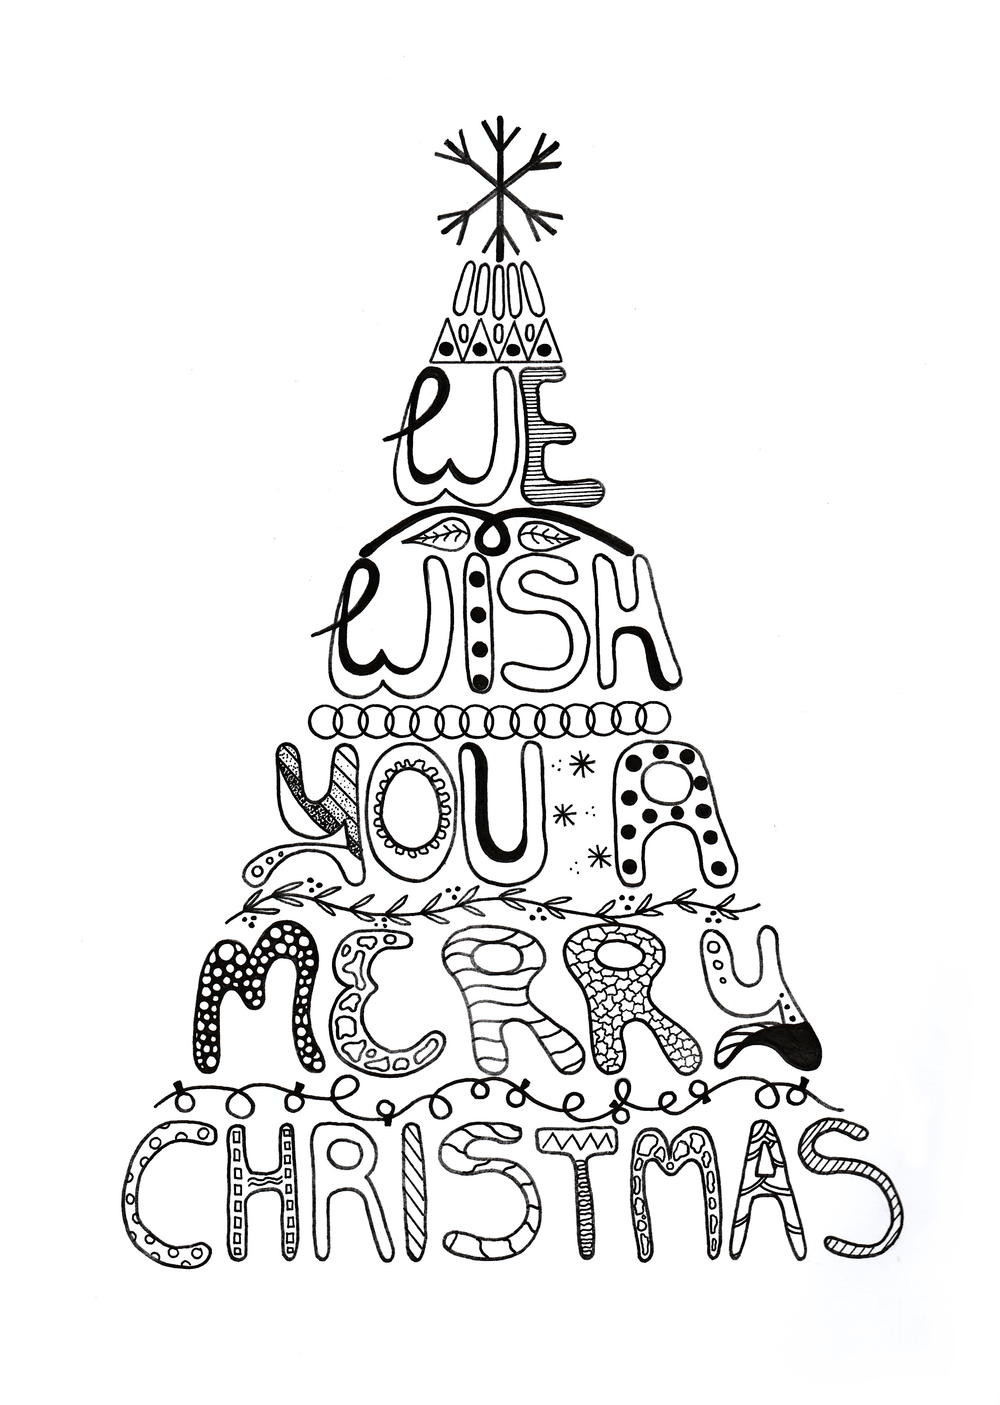 Christmas Adult Coloring Pages
 Merry Christmas Adult Coloring Page